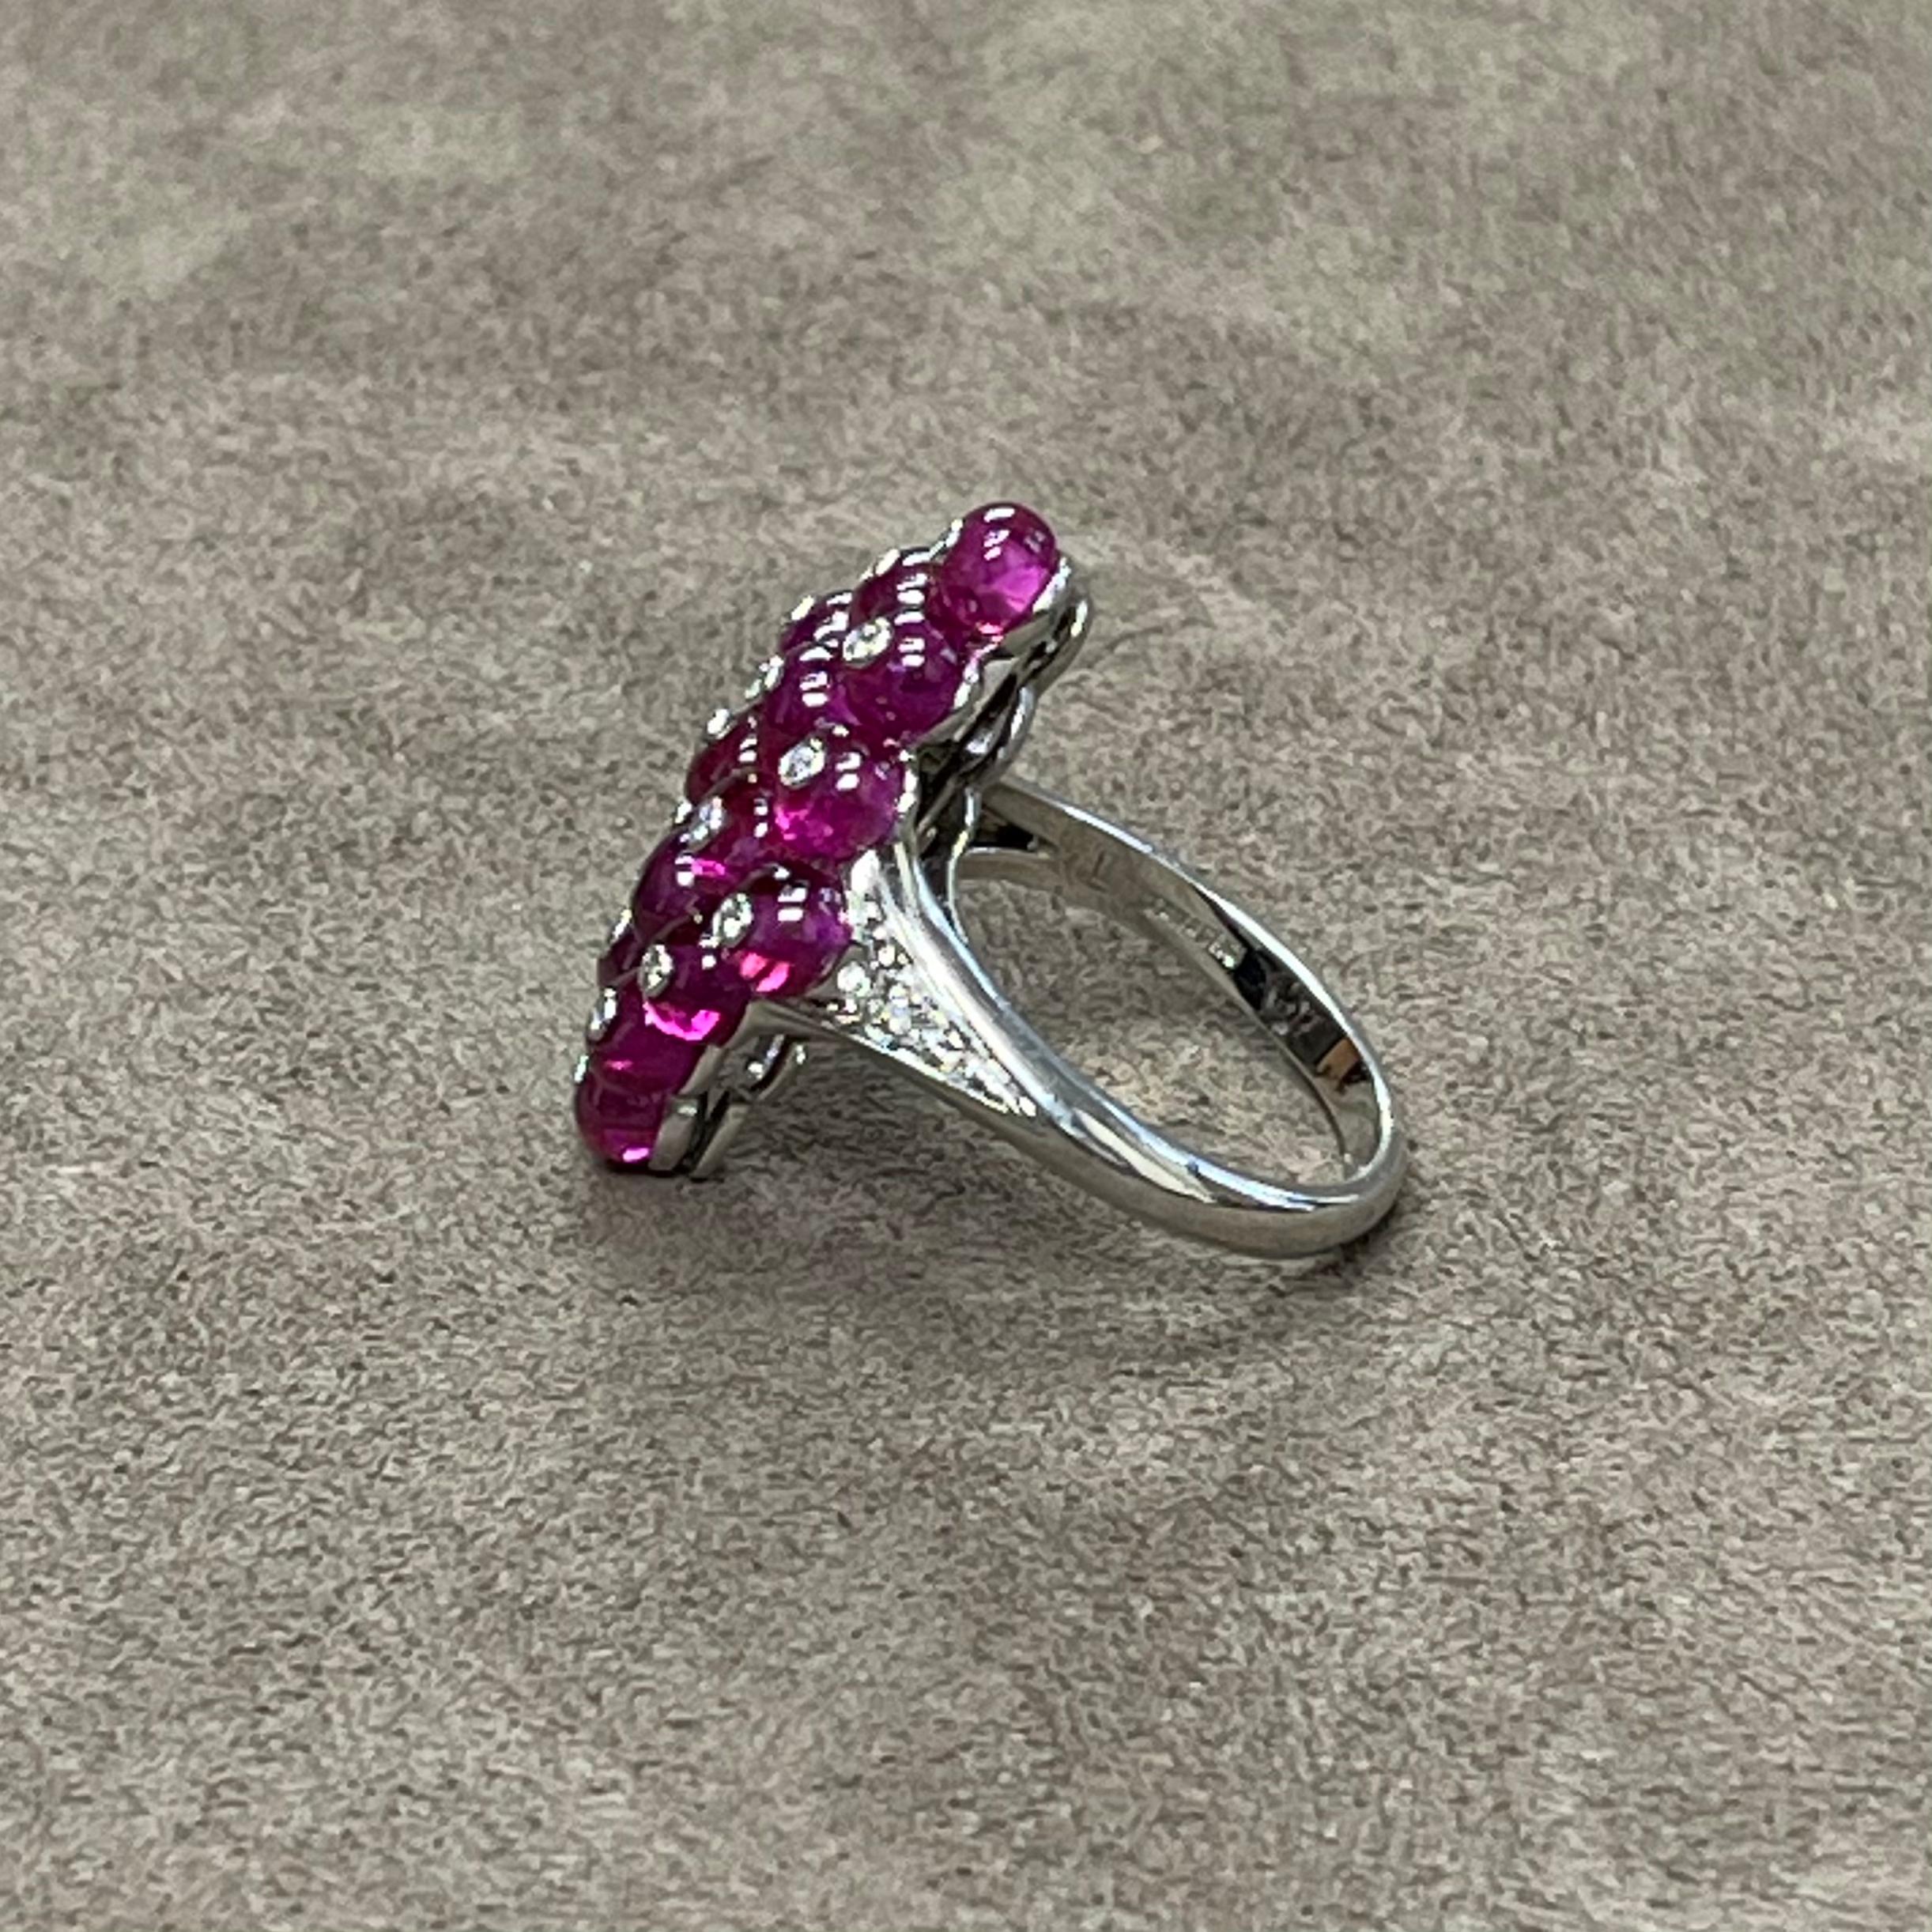 Kite Shaped Ruby & Diamond Bead Ring in Platinum, from 'G-One' Collection

Approx. Wt: 8.05 Carats (Ruby)

Diamonds: G-H / VS, Approx Wt: 0.17 Carats 